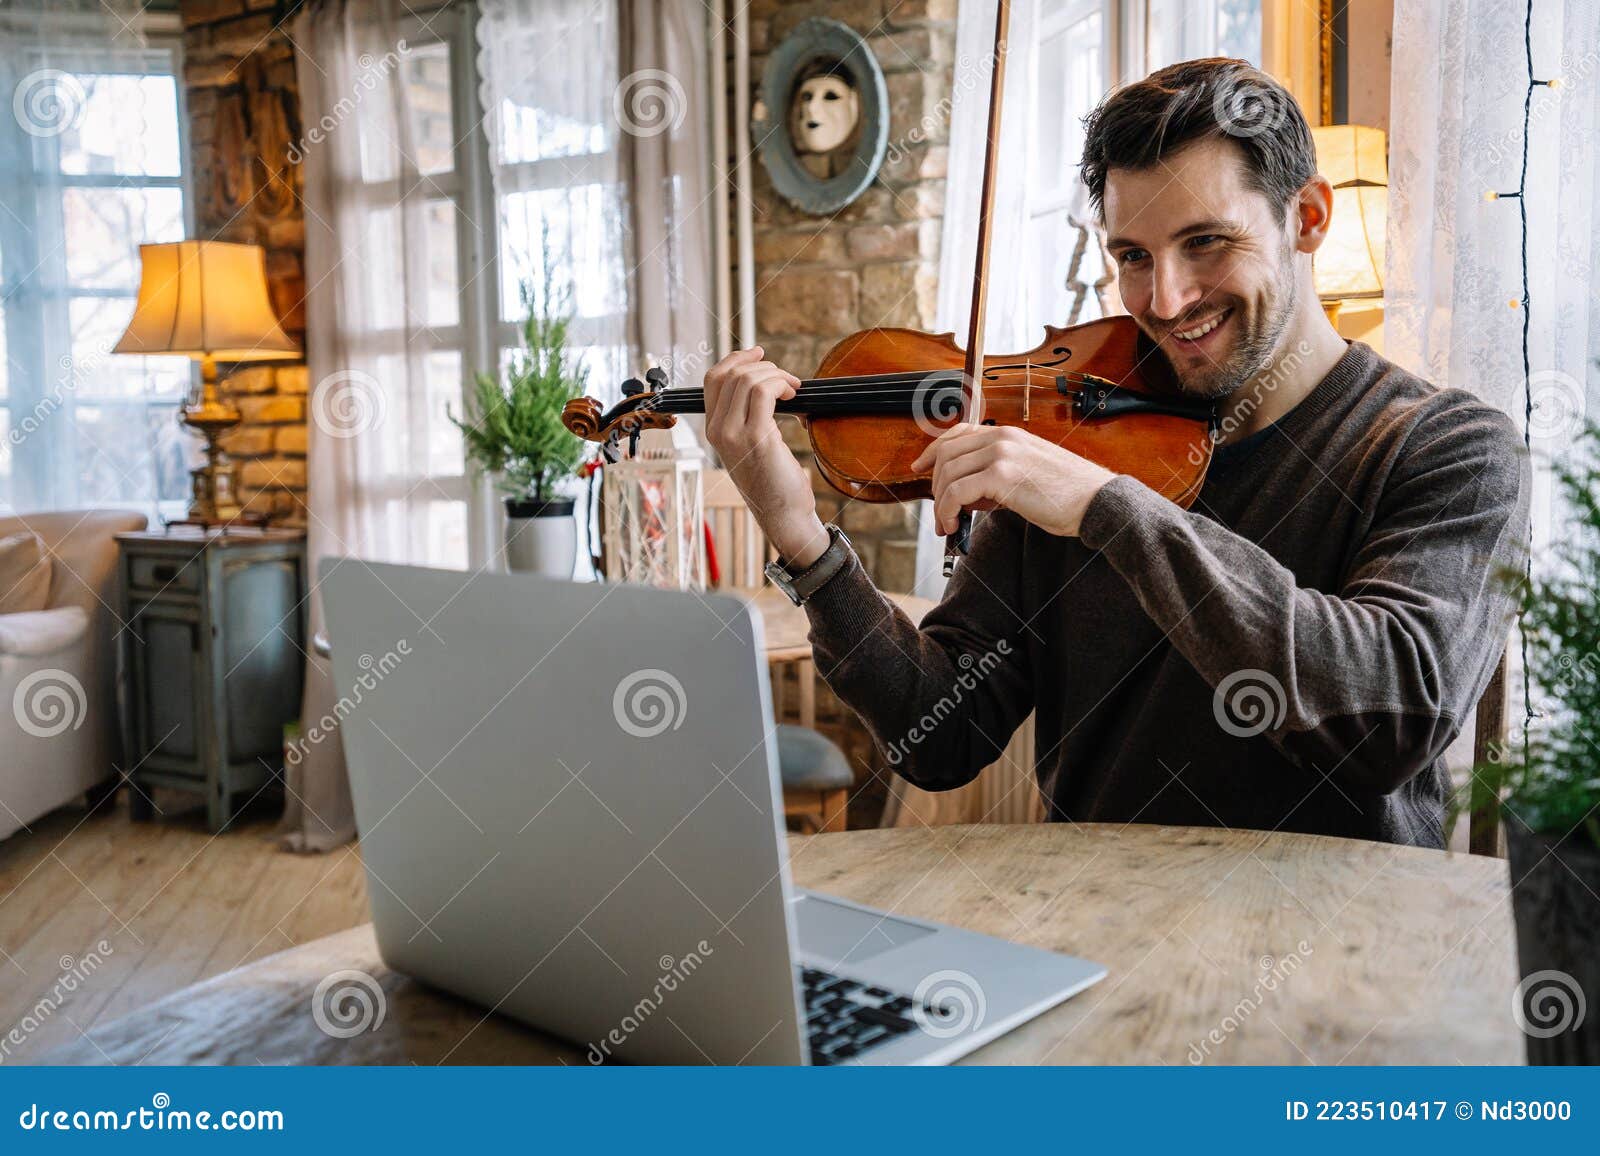 Man Student Learns To Play the Violin Online Laptop. Stock Image - Image instrument, 223510417